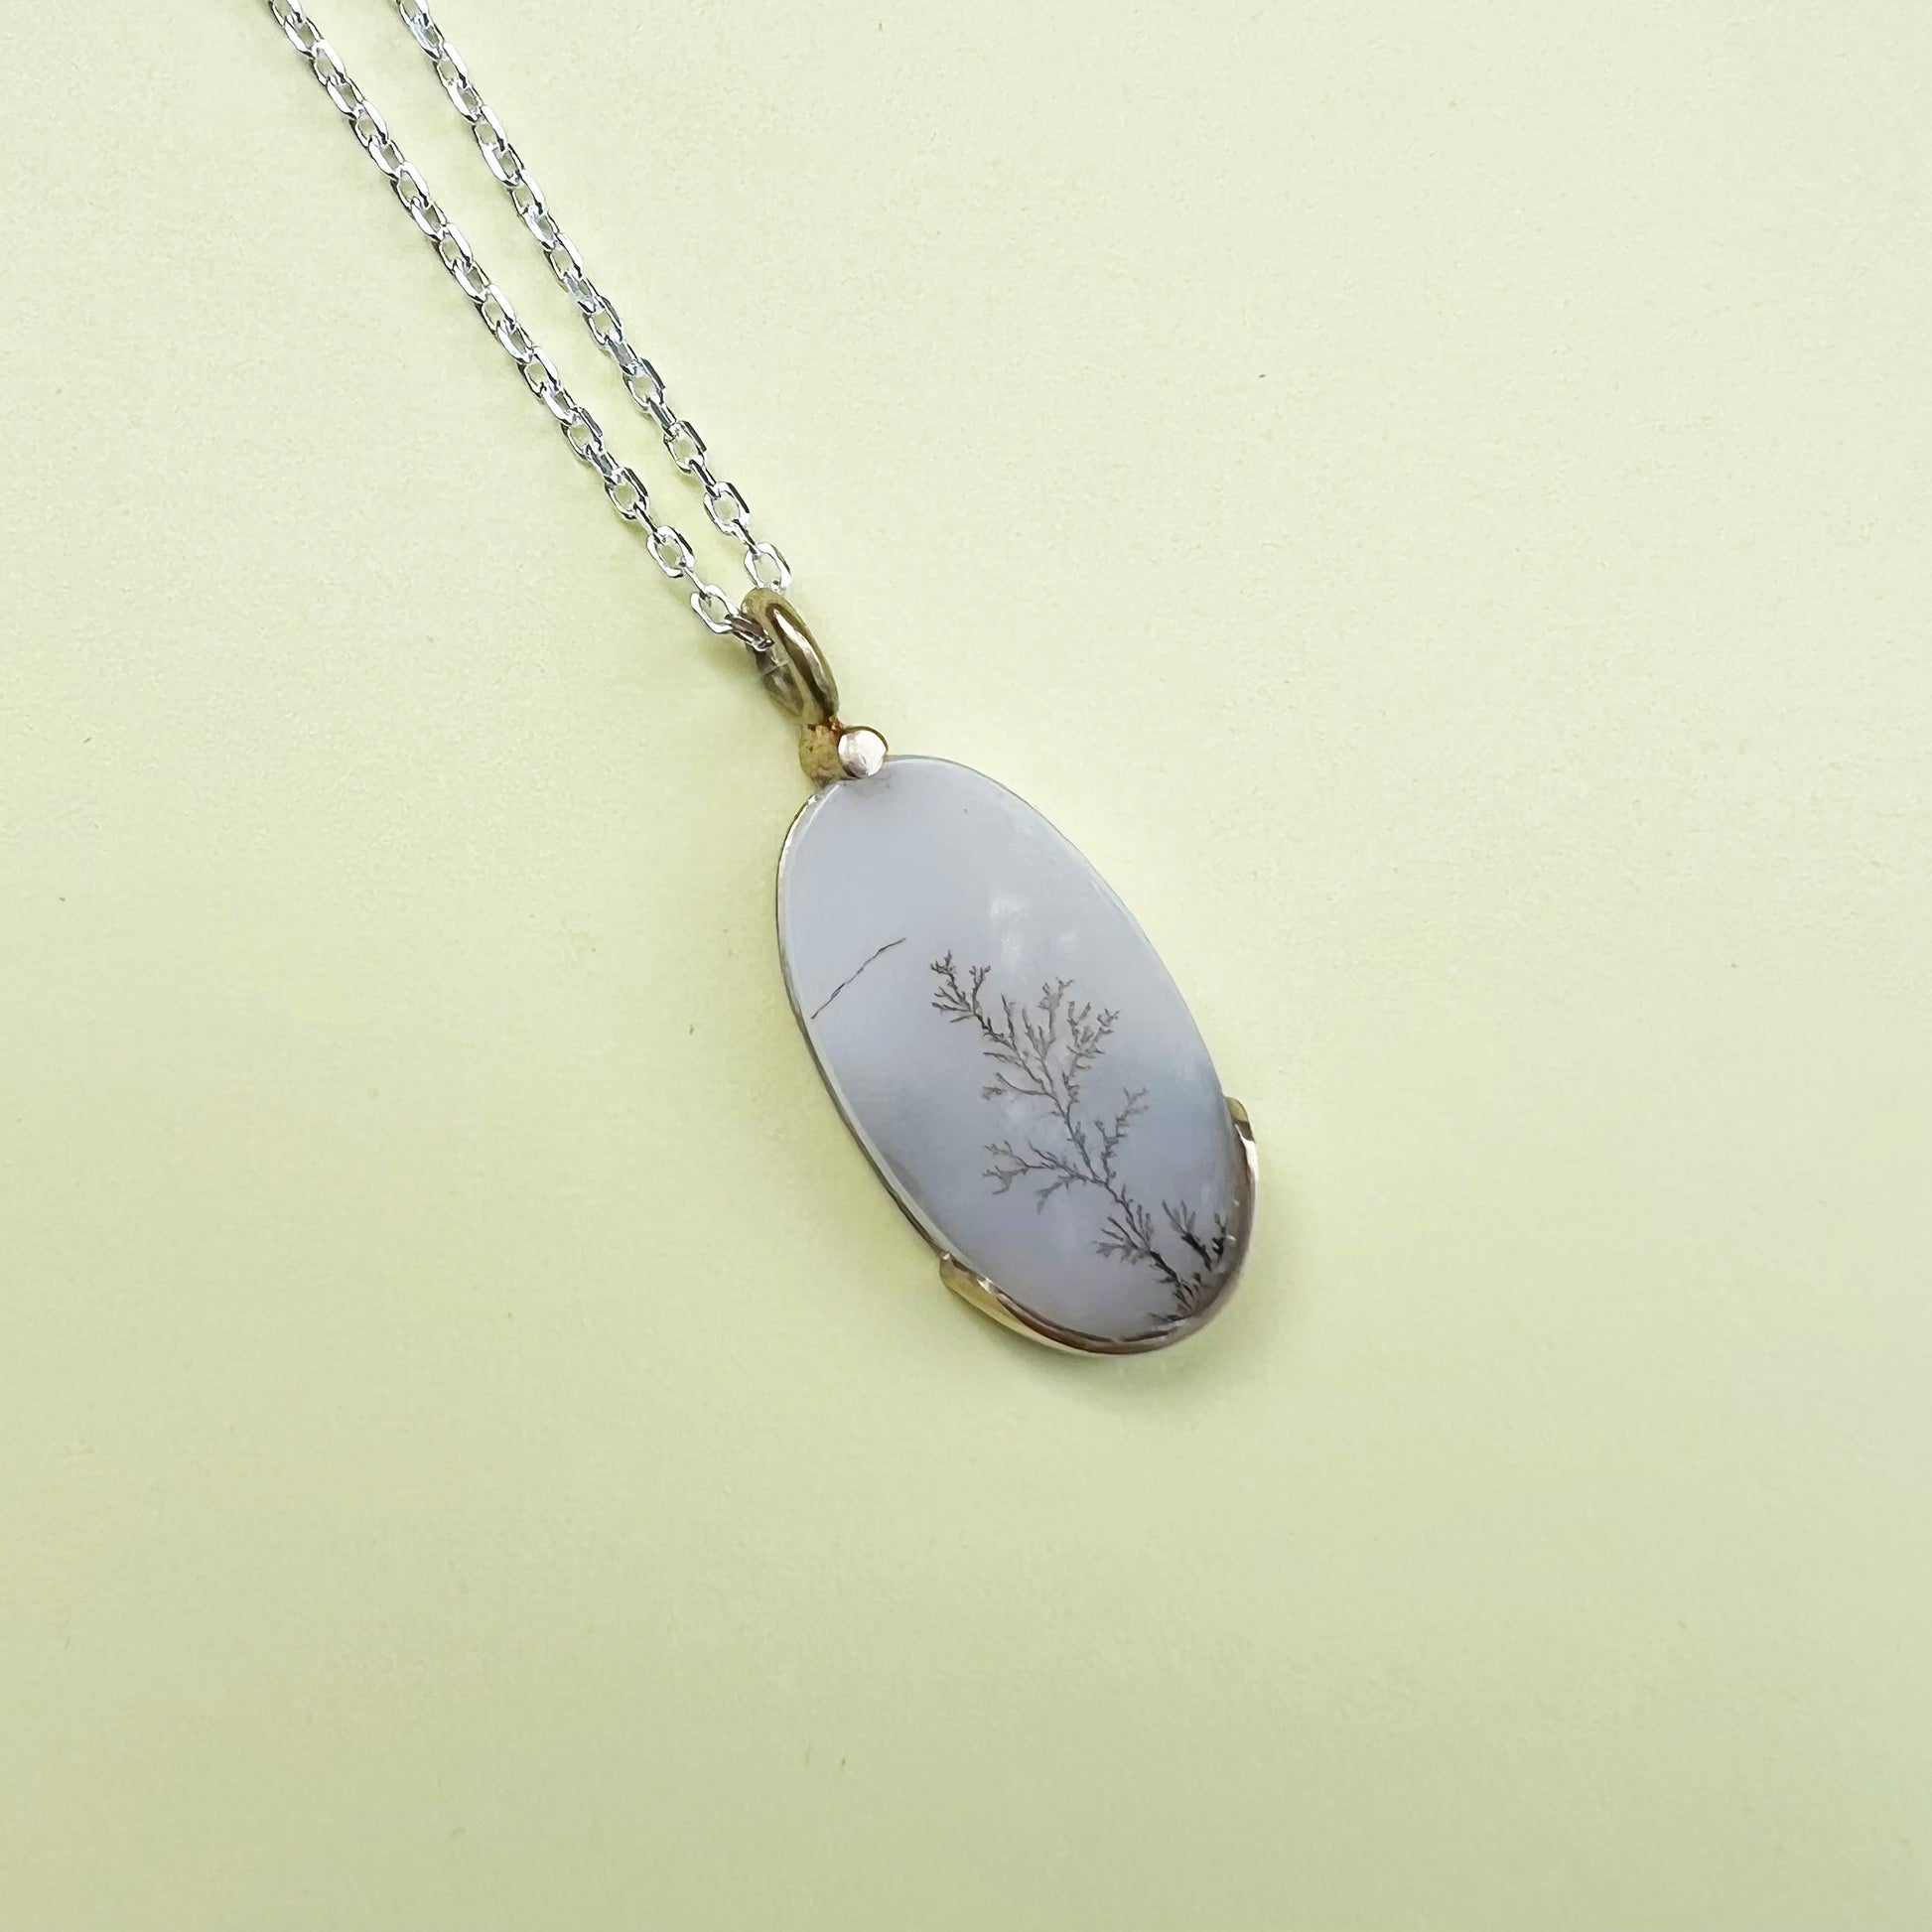 18ct gold & dendritic agate necklace, agate necklace, 18ct gold necklace, sterling silver chain, agate pendant, gold necklace, sterling silver